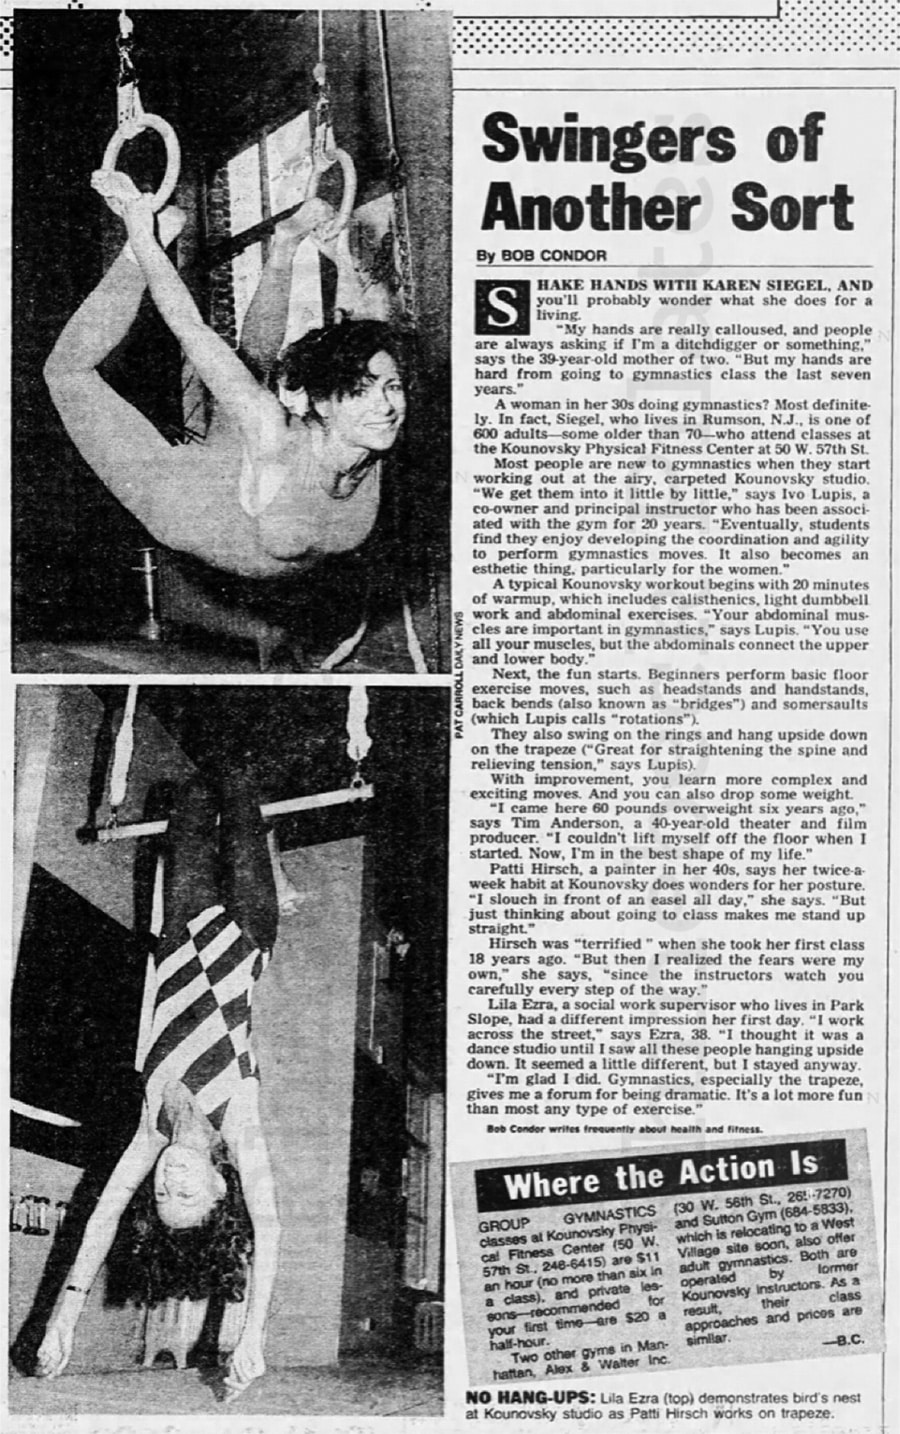 Alex-Walter-swingers-another-sort-pilates-archive-article